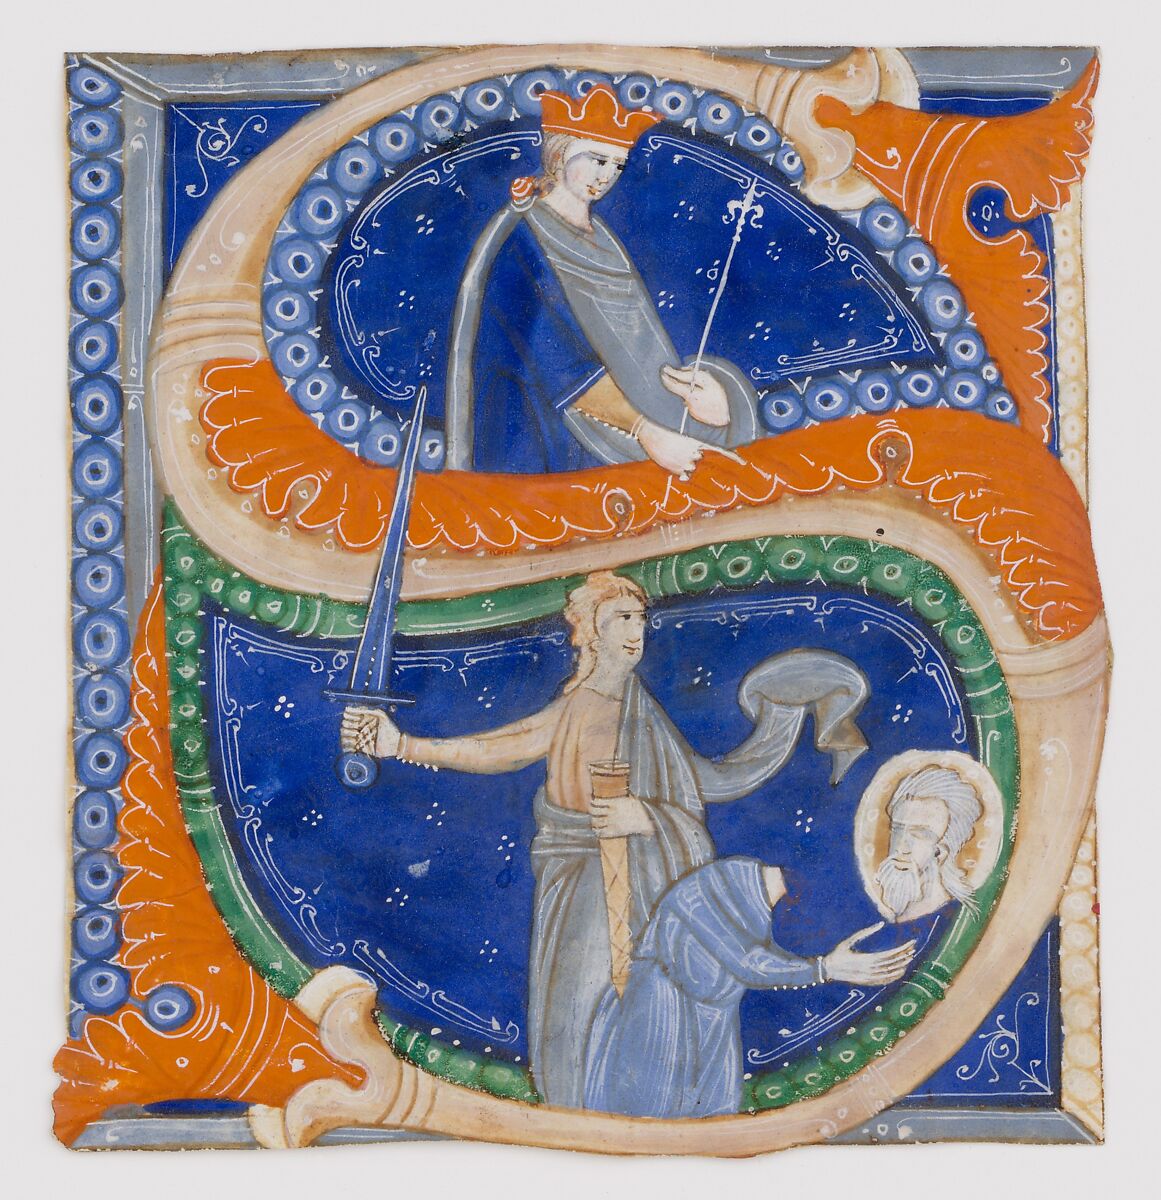 Manuscript Illumination with the Beheading of Saint Paul in an Initial S, from a Gradual